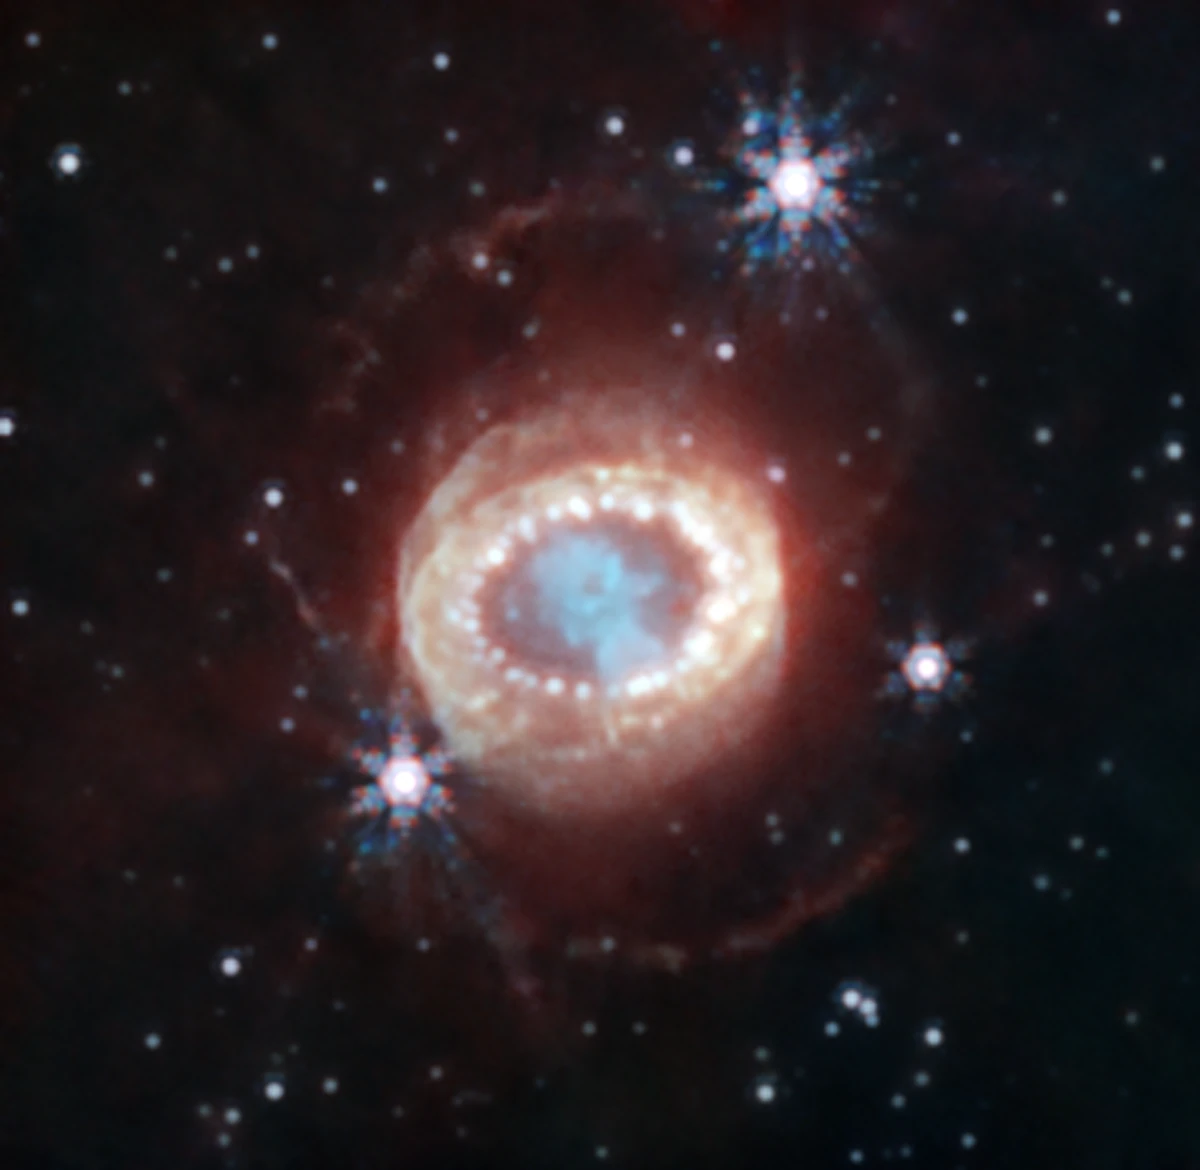 A study conducted by the University of Cardiff with the James Webb has captured spectacular images of supernova 1987A